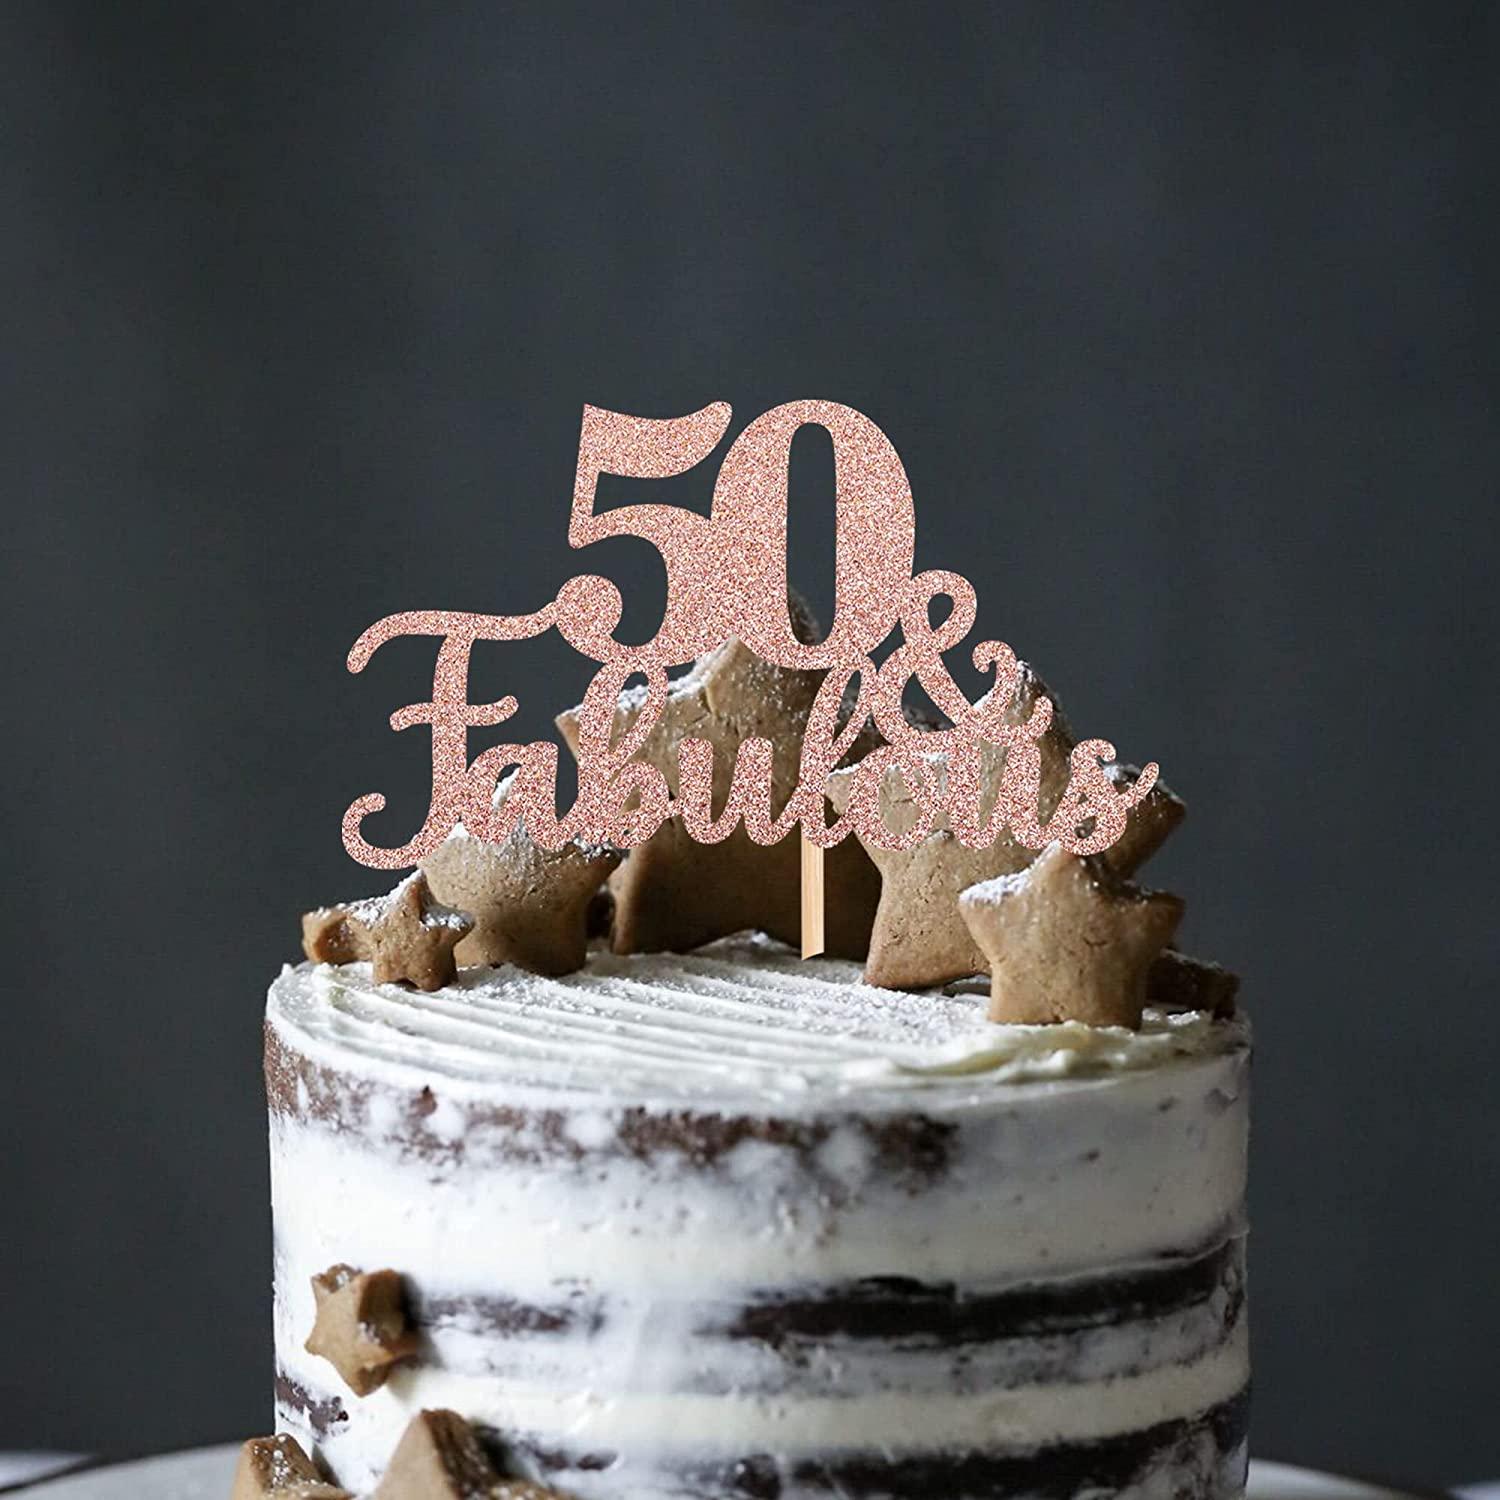 1 Pcs 50 And Fabulous Cake Topper Glitter Fifty And Fabulous Cake Toppers Happy 50th Birthday Cake 